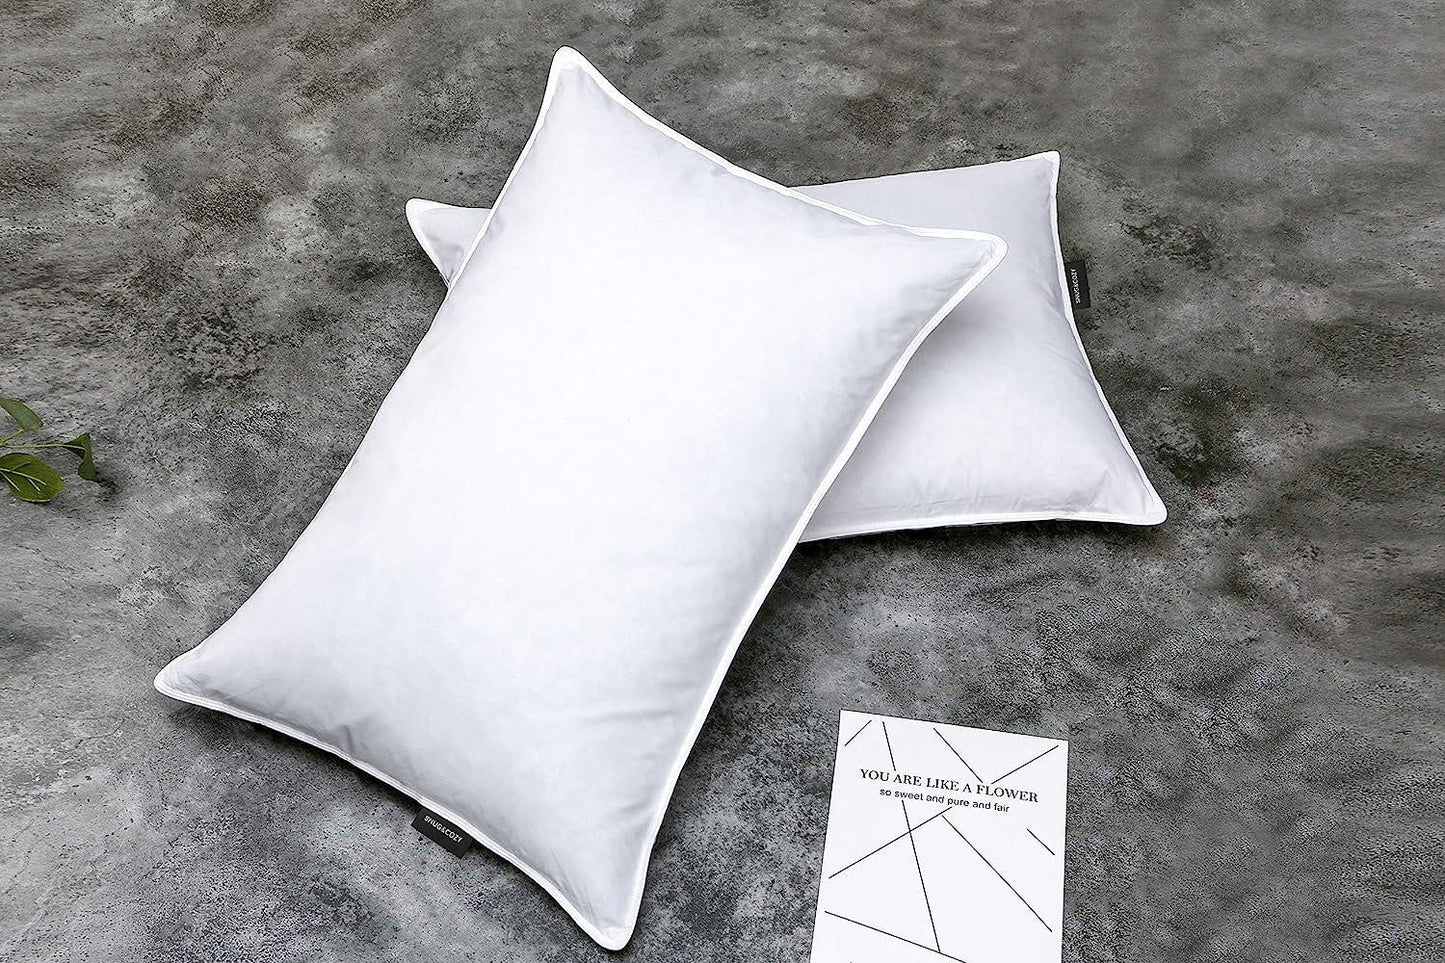 &COZY Grey Goose Feather Down Pillows for Sleeping(2 Pack)- Standard Size(20IN×26IN), Goose Feather&Down Filling, 100% Cotton Cover, 100% Down Proof,